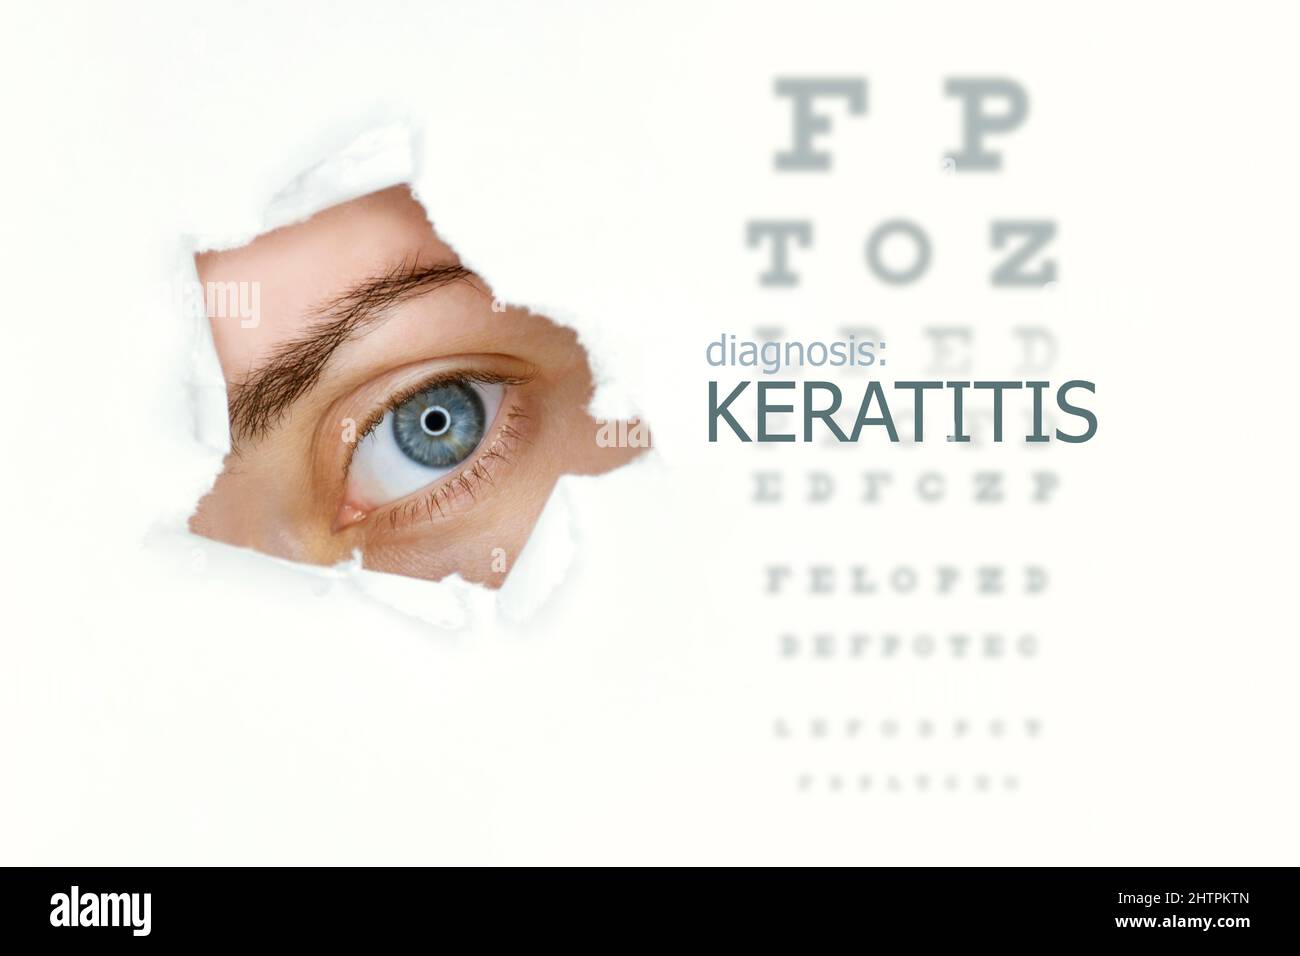 Keratitis disease poster with eye test chart and blue eye.  Isolated on white Stock Photo